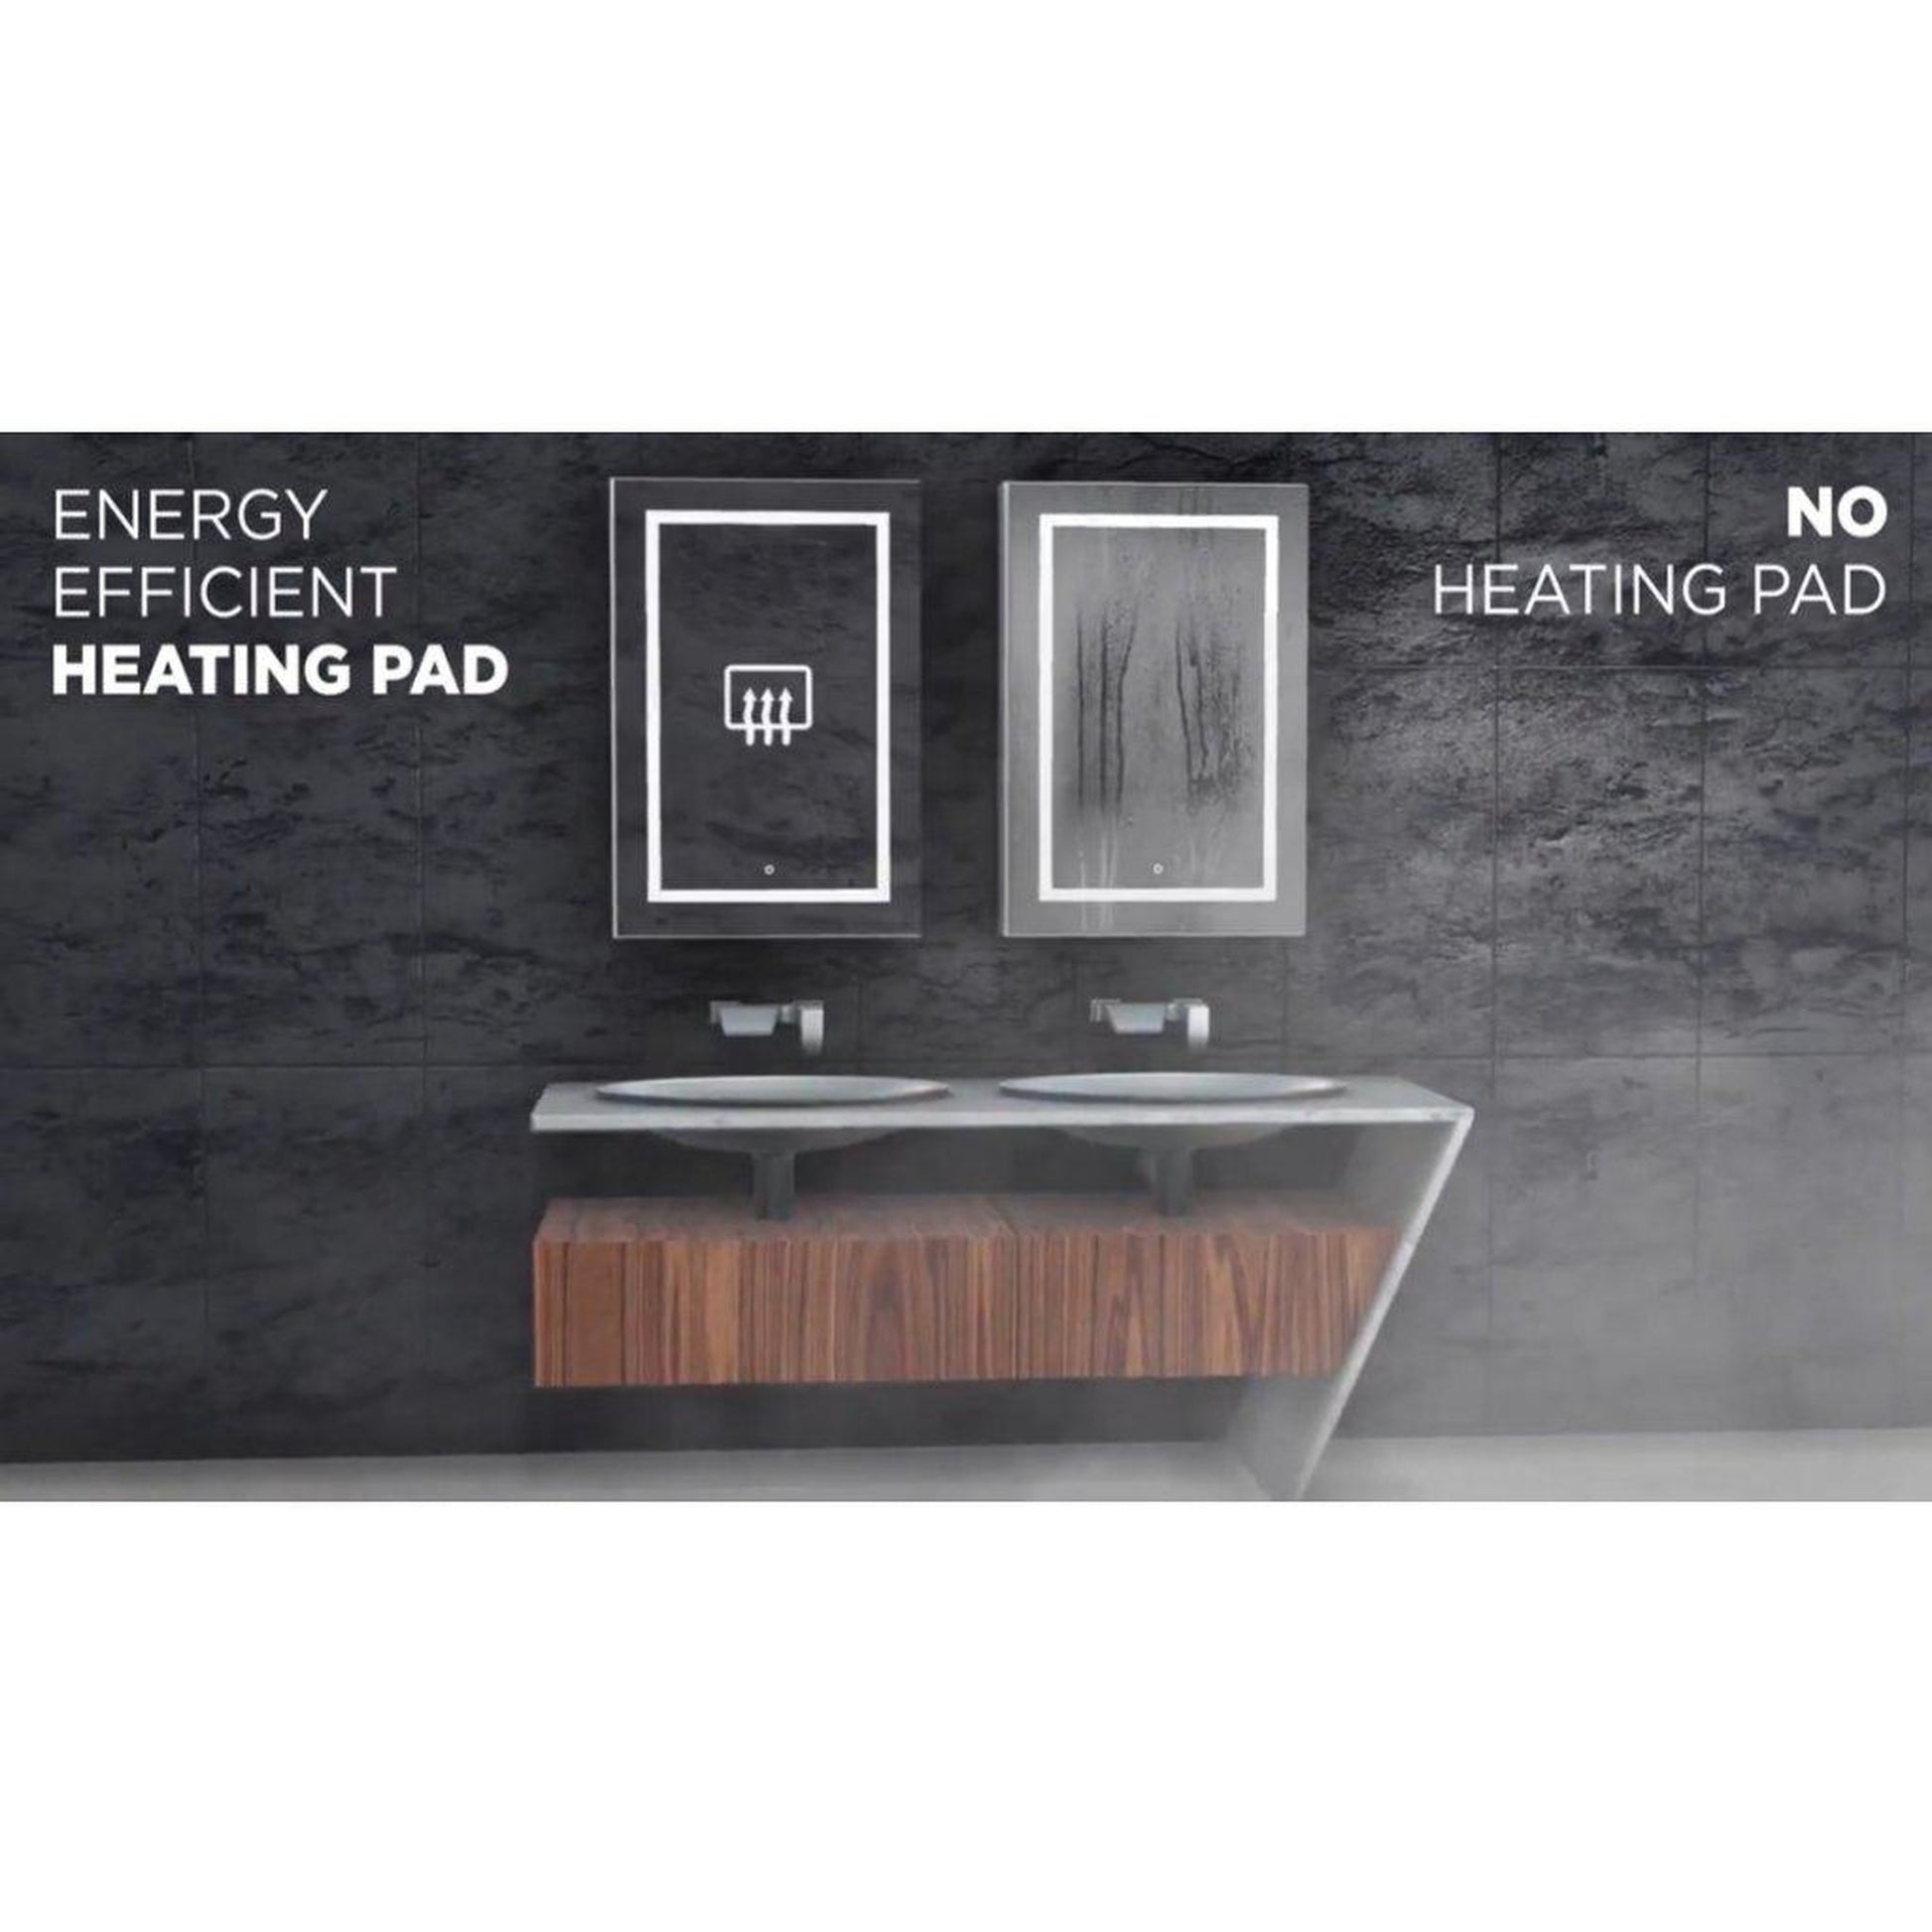 Krugg Reflections Tudor 30" x 20" 5000K Octagon Wall-Mounted Illuminated Silver Backed LED Mirror With Built-in Defogger and Touch Sensor On/Off Built-in Dimmer